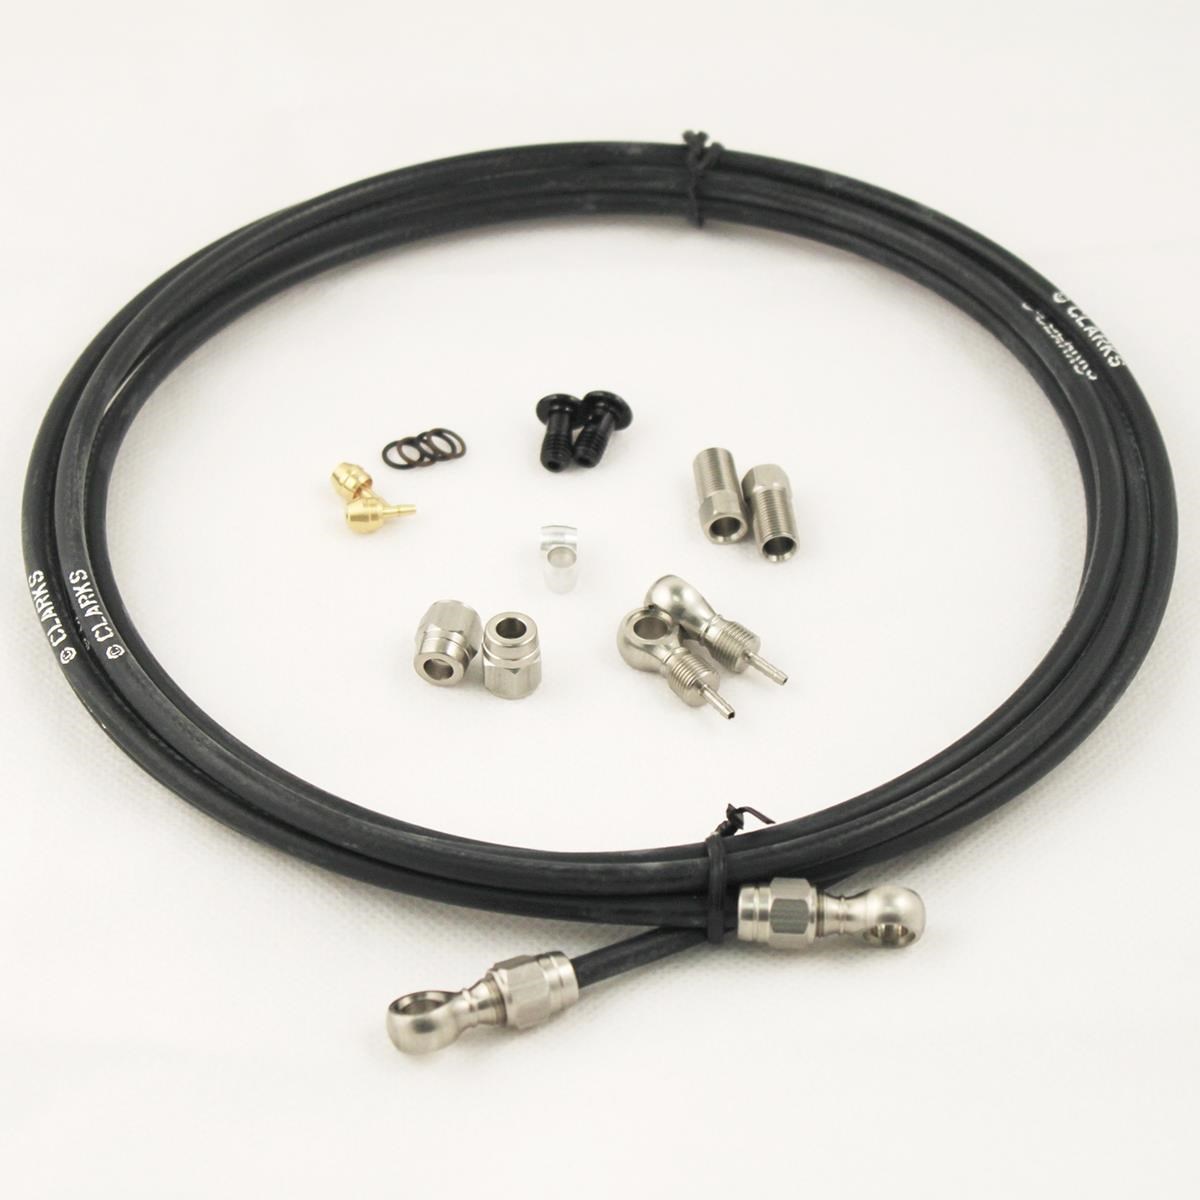 Clarks Hydraulic Hose Kit To Fit Shimano/Clarks System